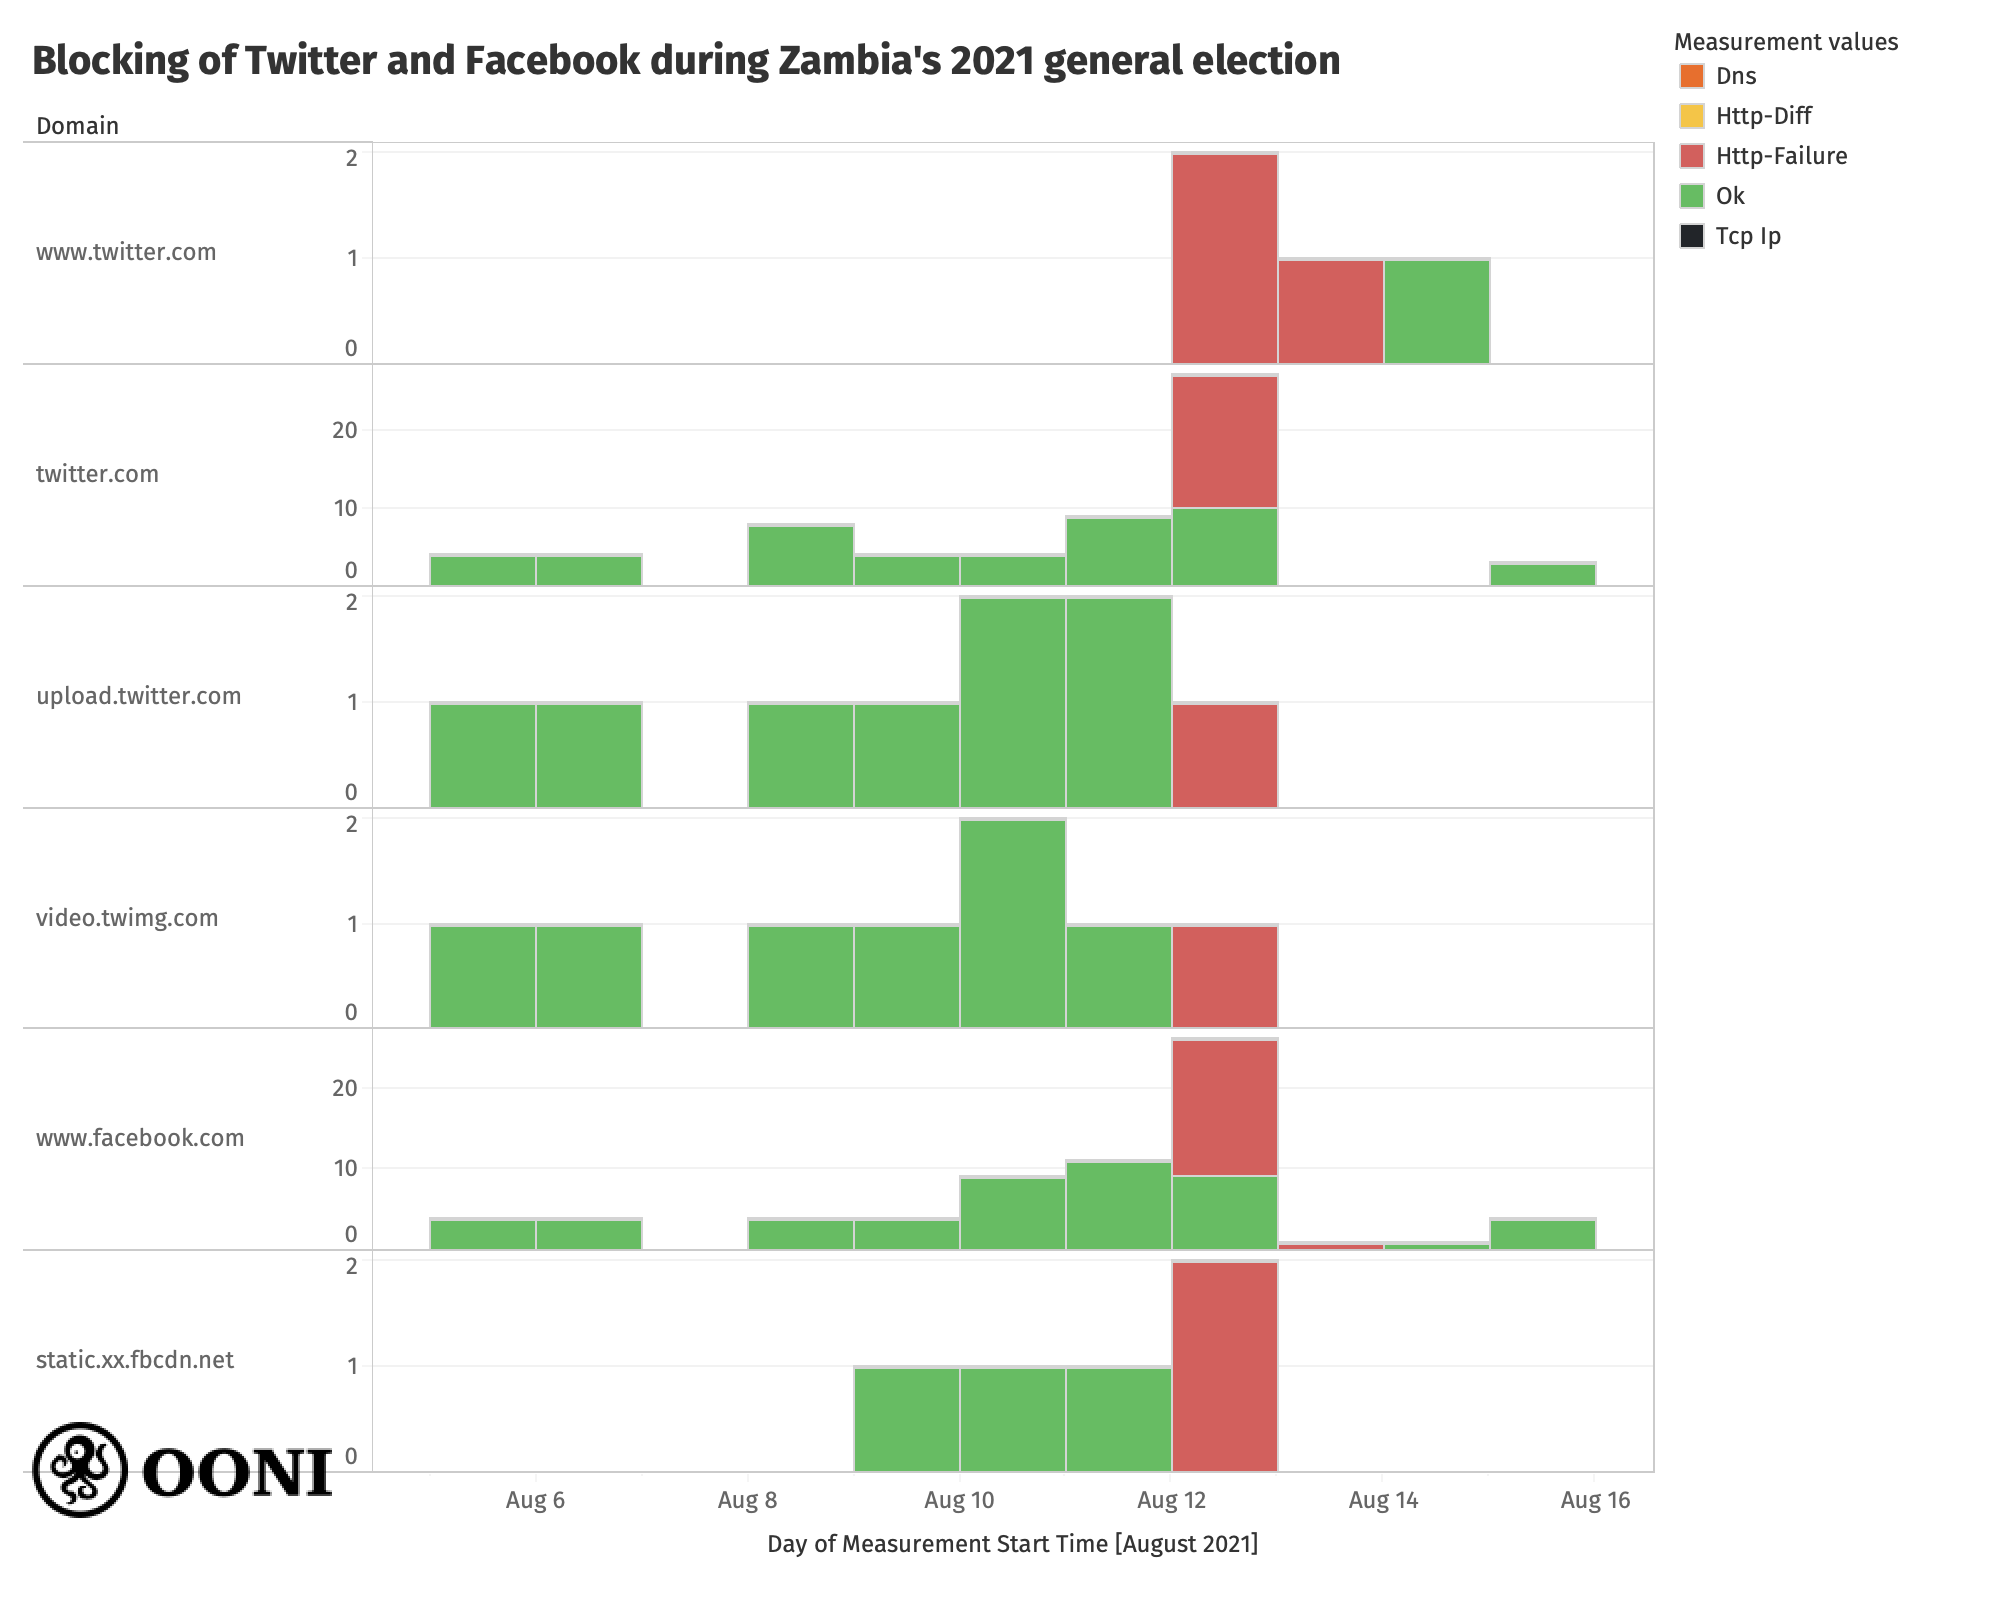 Recently, on 12th August 2021, general elections were held in Zambia, during which access to popular online social media platforms was reportedly bloc